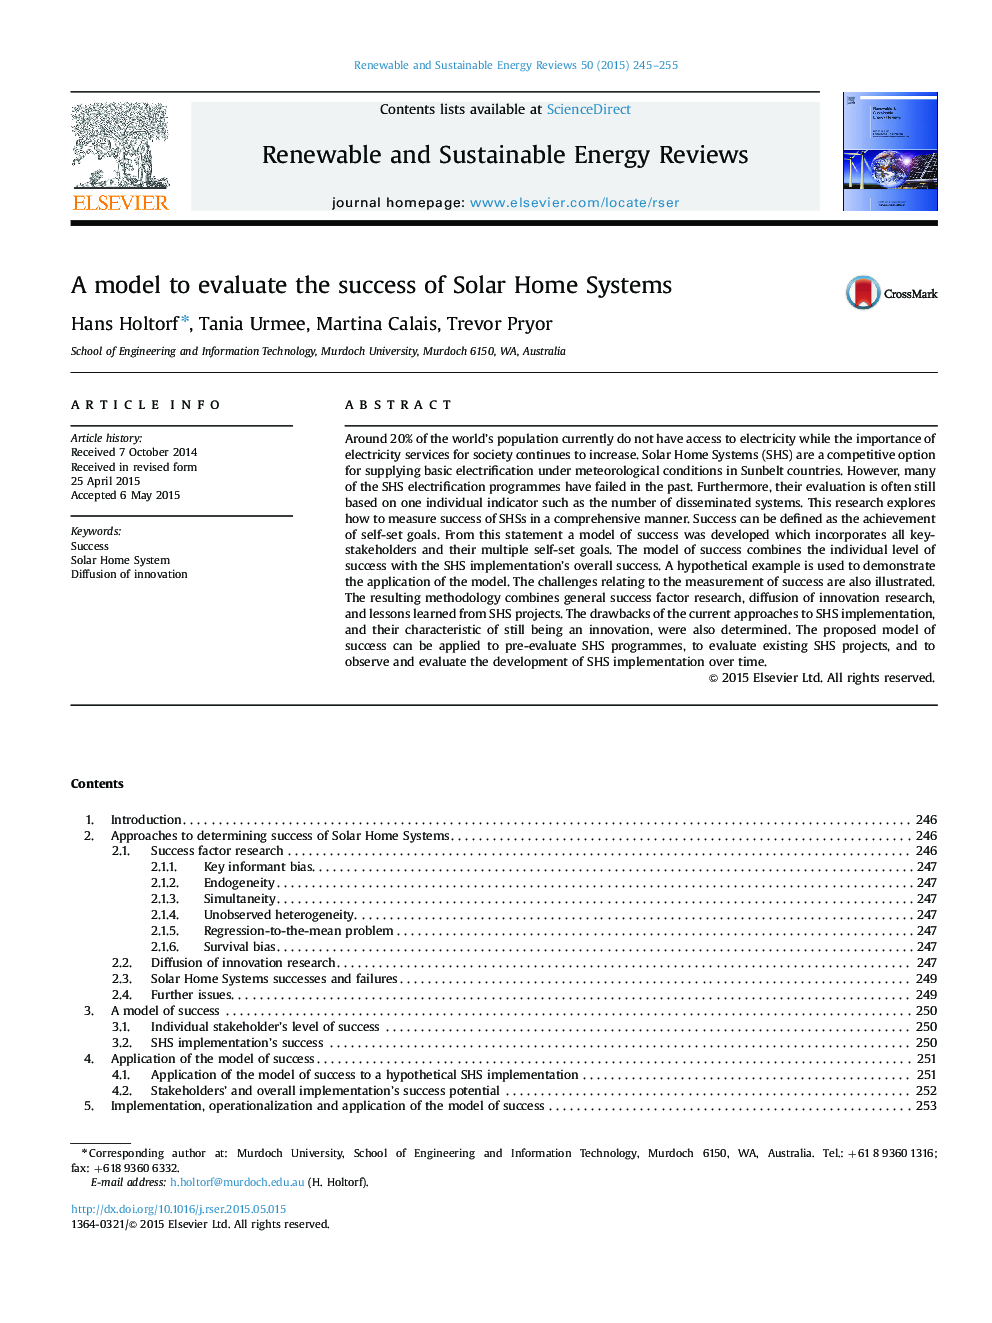 A model to evaluate the success of Solar Home Systems